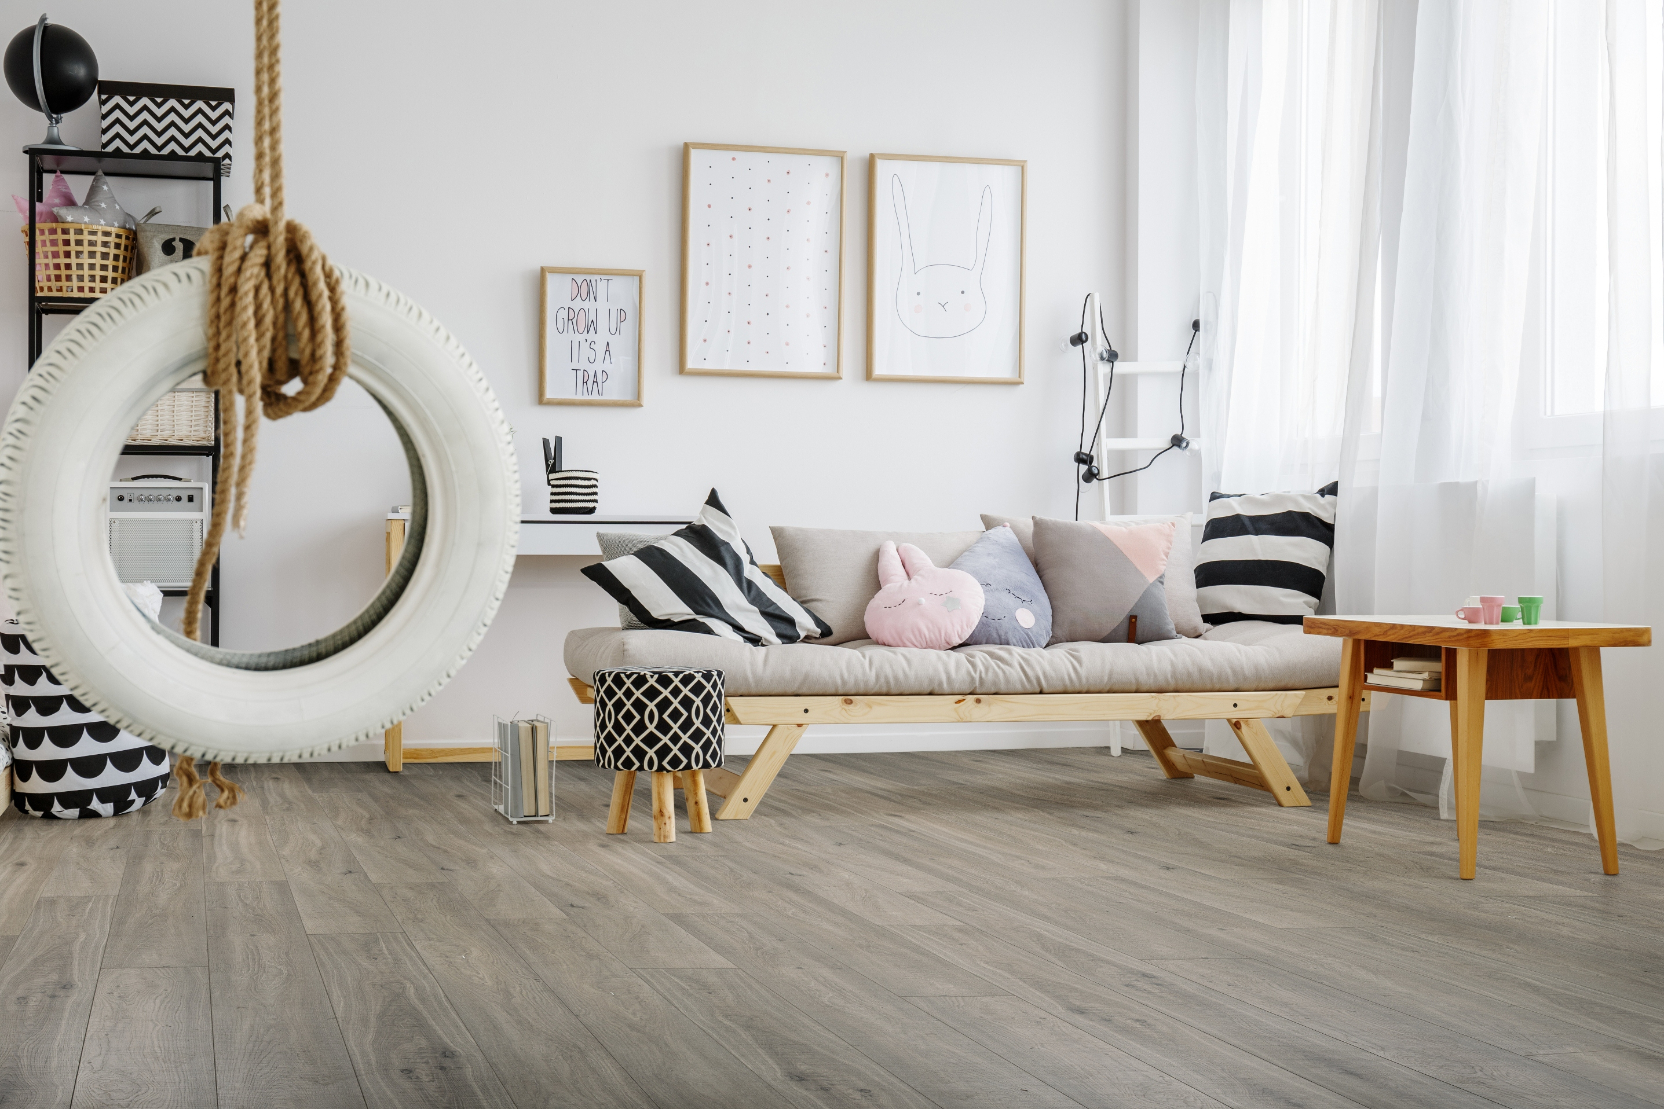 These are the three essential traits of a good flooring